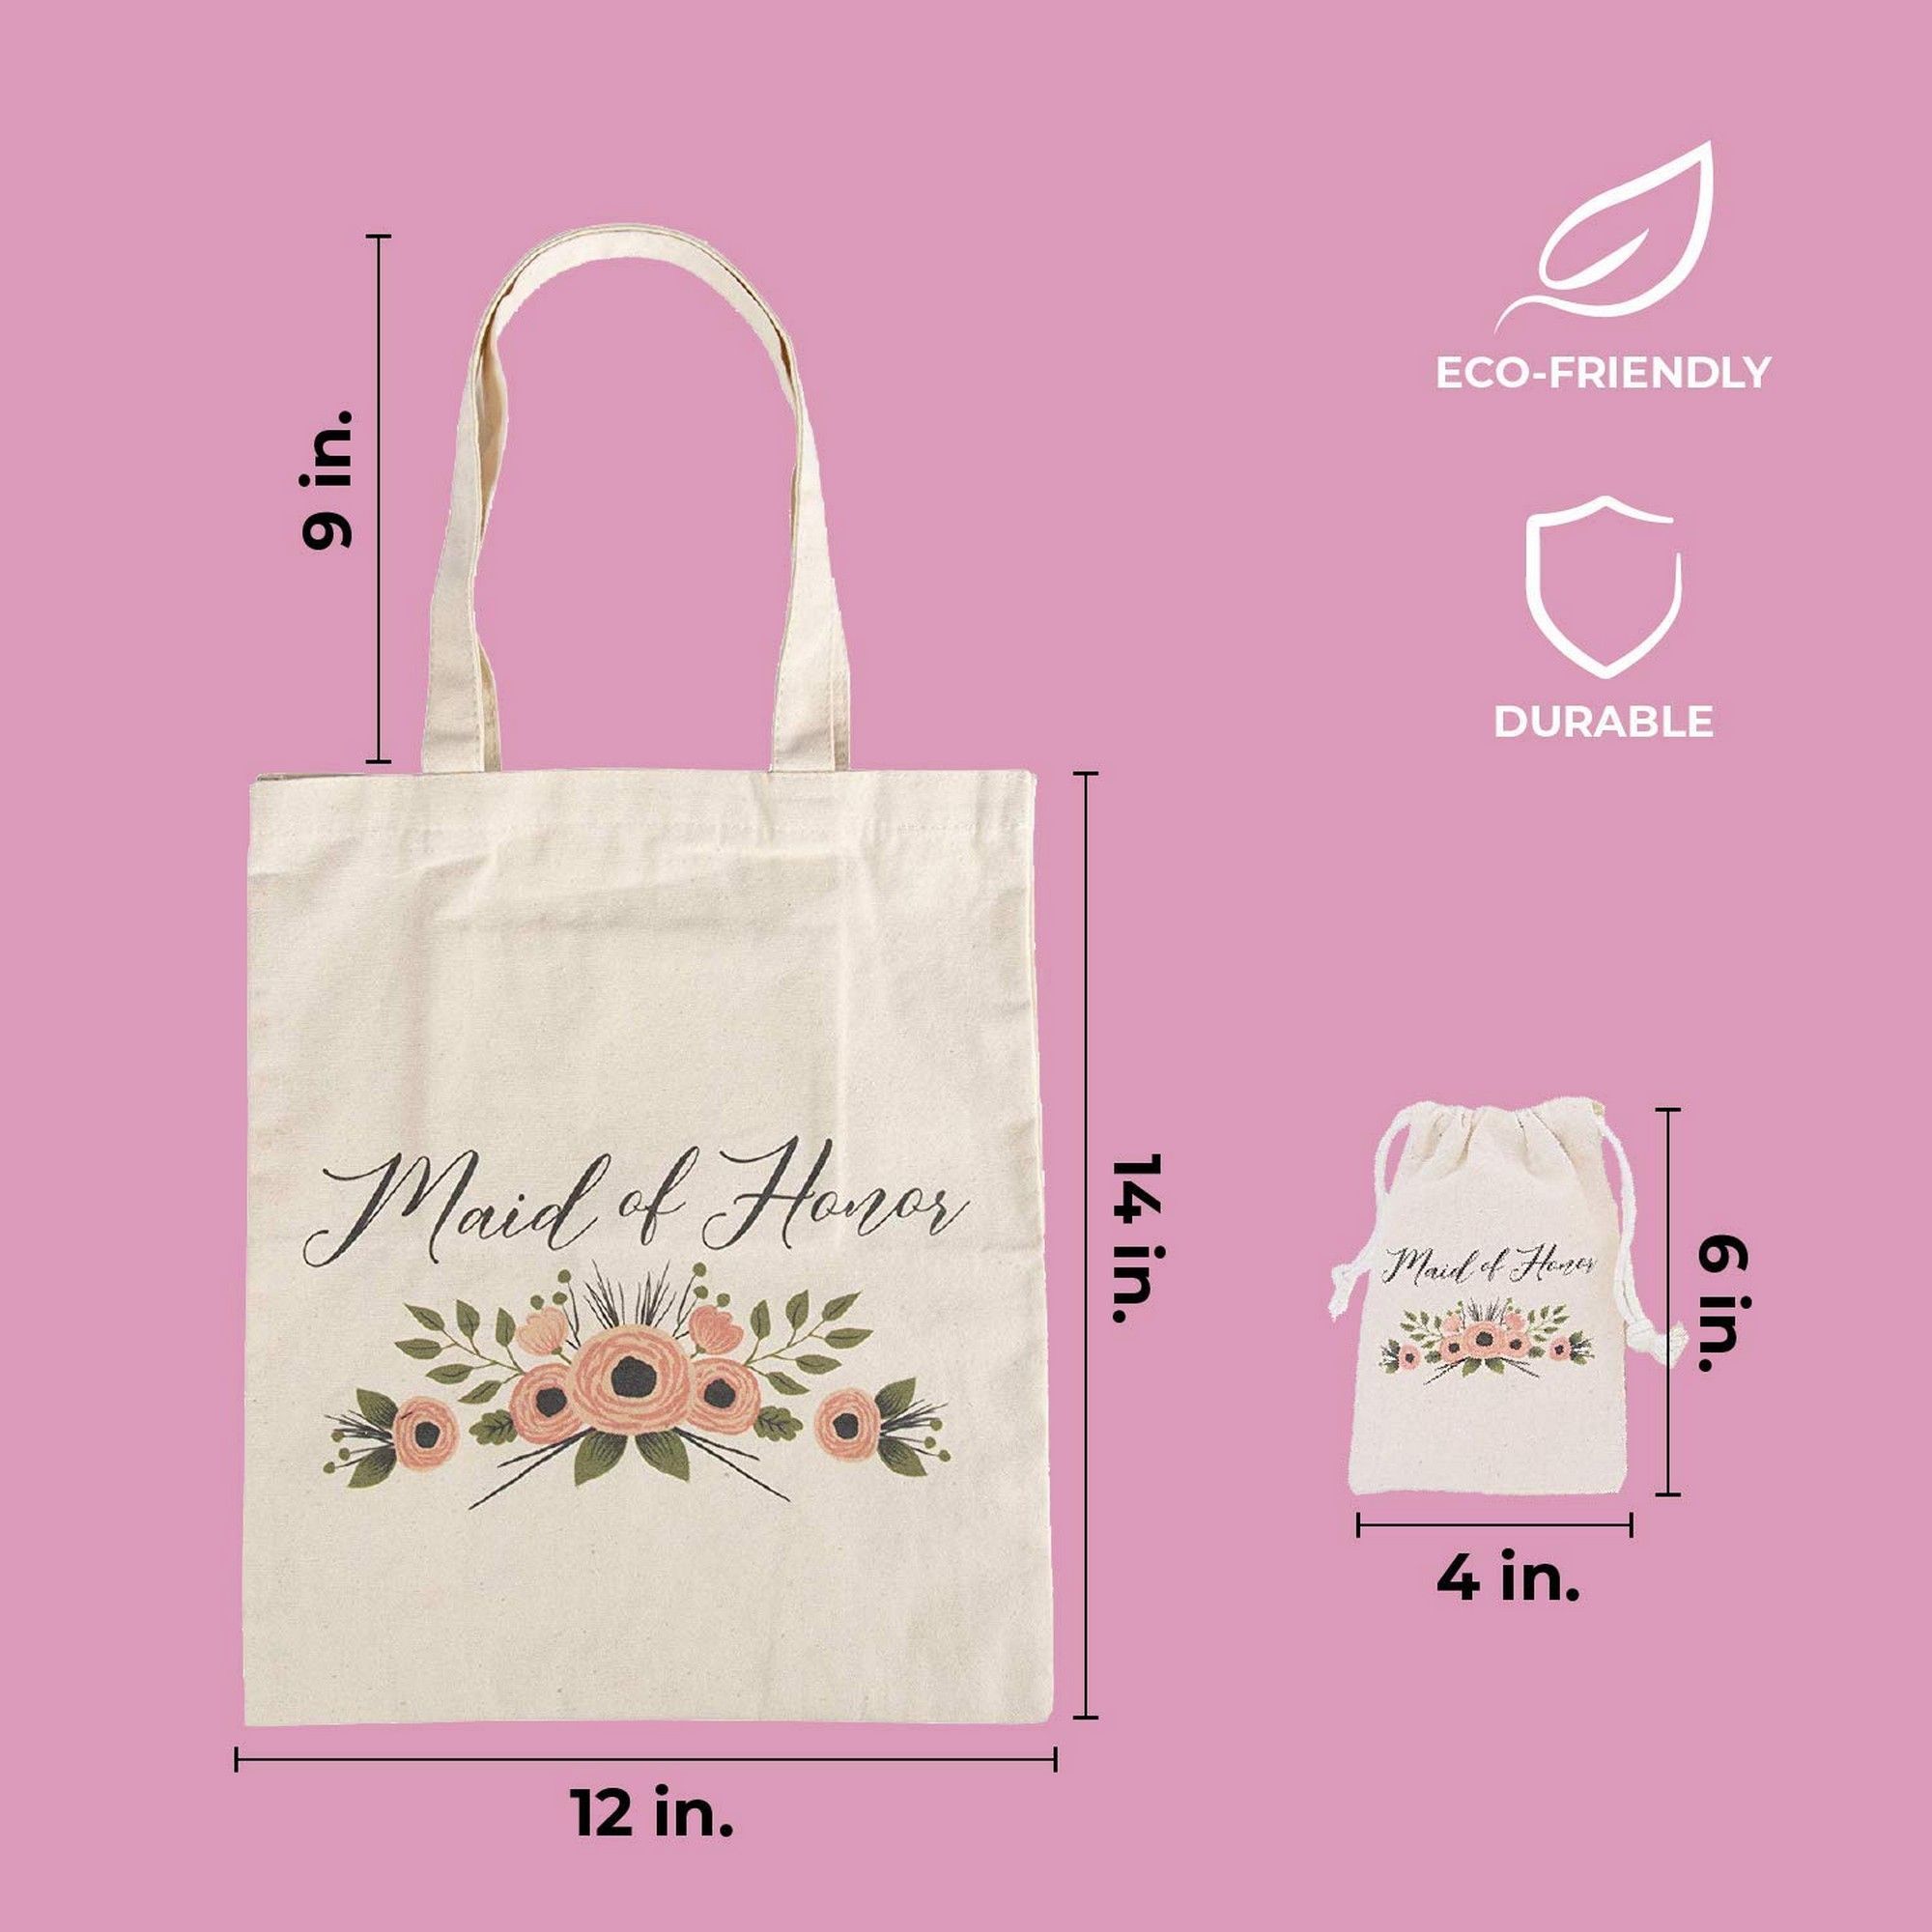 Maid of Honor Cotton Canvas Tote Bag Custom Wedding Party Gift Wedding Day Kit Bag Bridal Party Honor Attendant Tote 3001